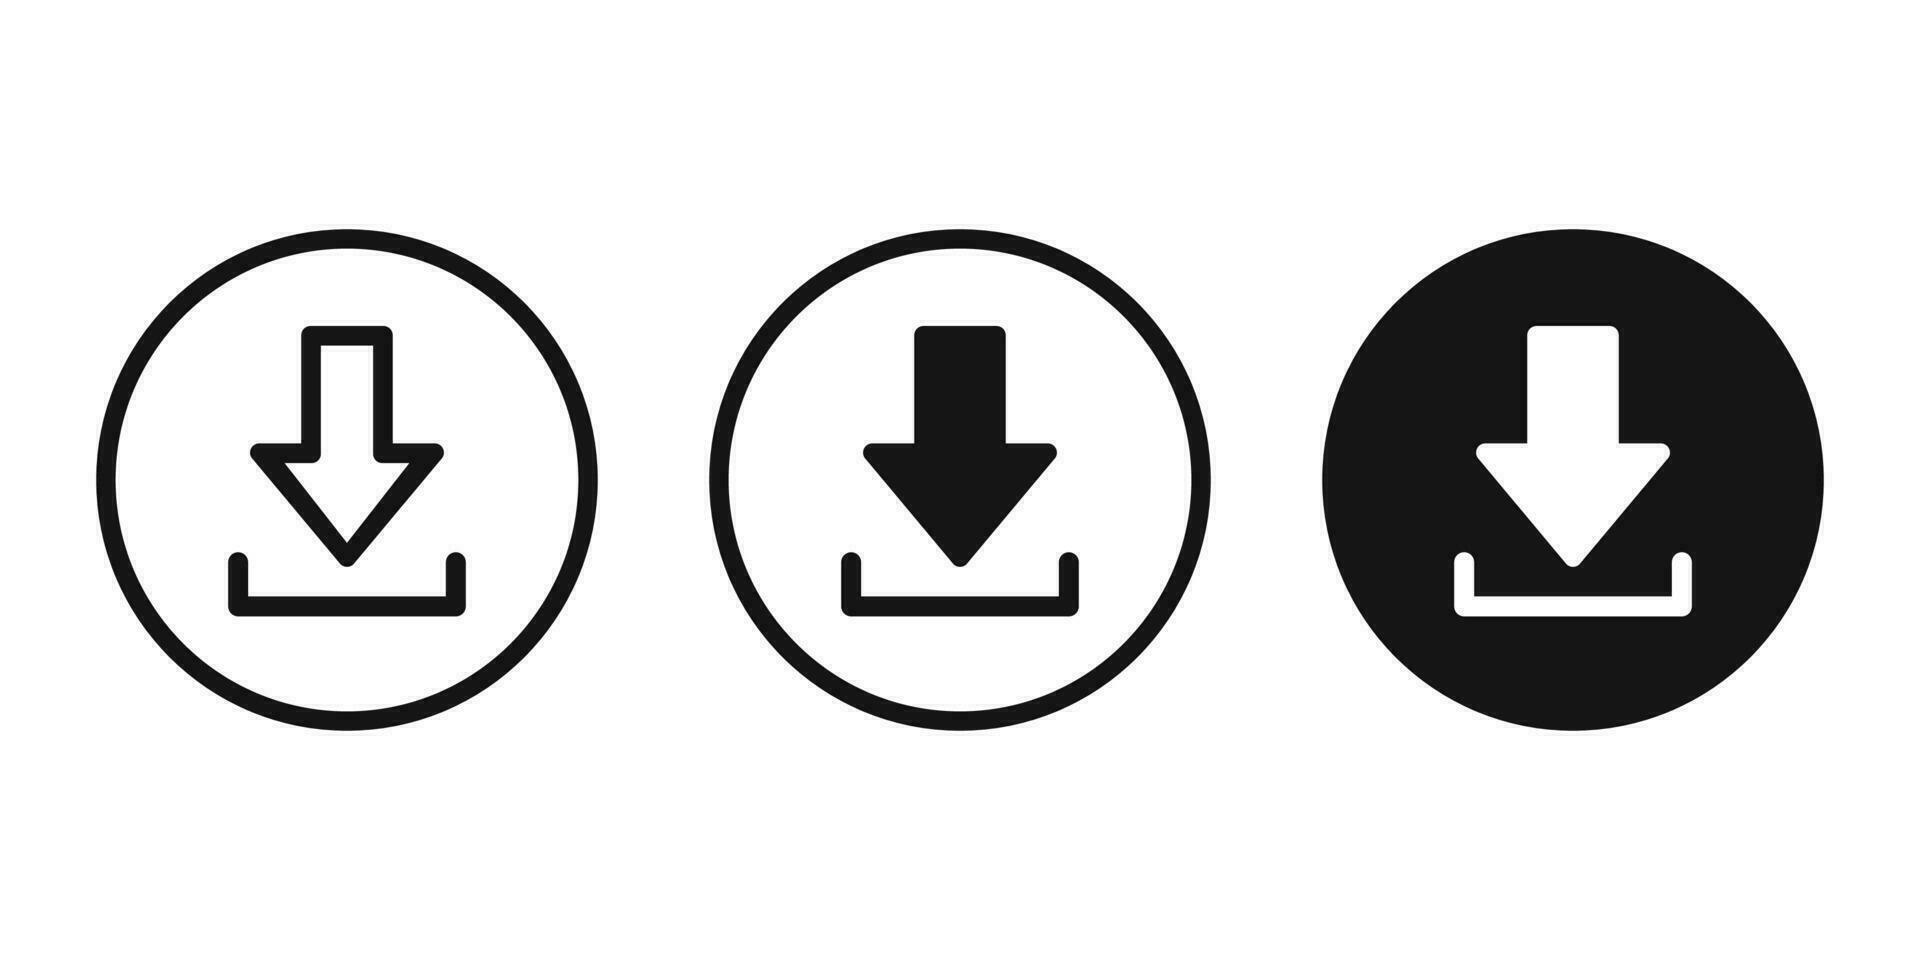 Download flat vector icon. Install symbol. Download icon. Download button. Load symbol.